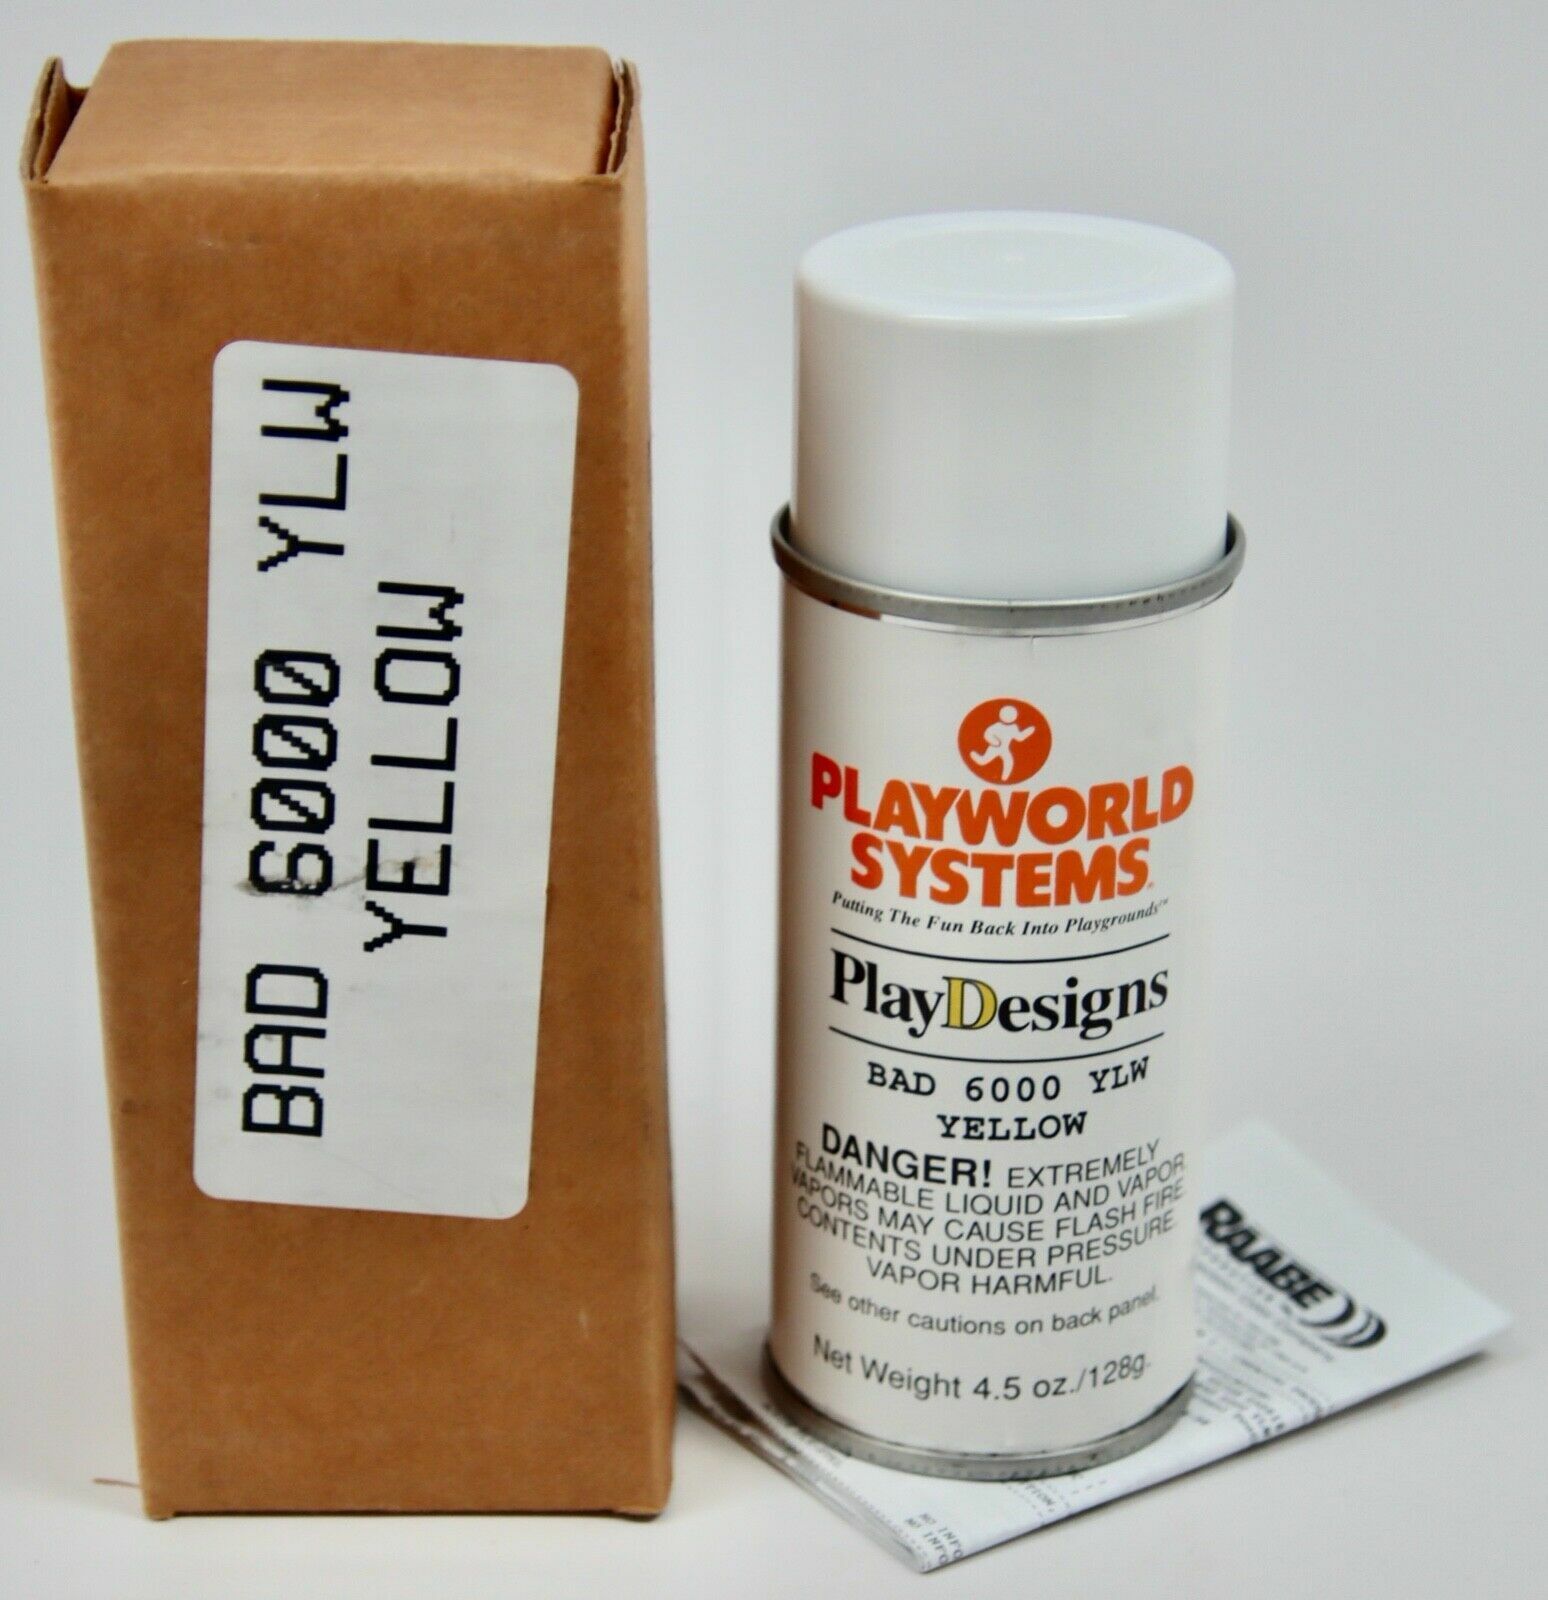 PlayWorld Systems Play Designs BAD 6000 YLW Yellow Touchup Spray Paint